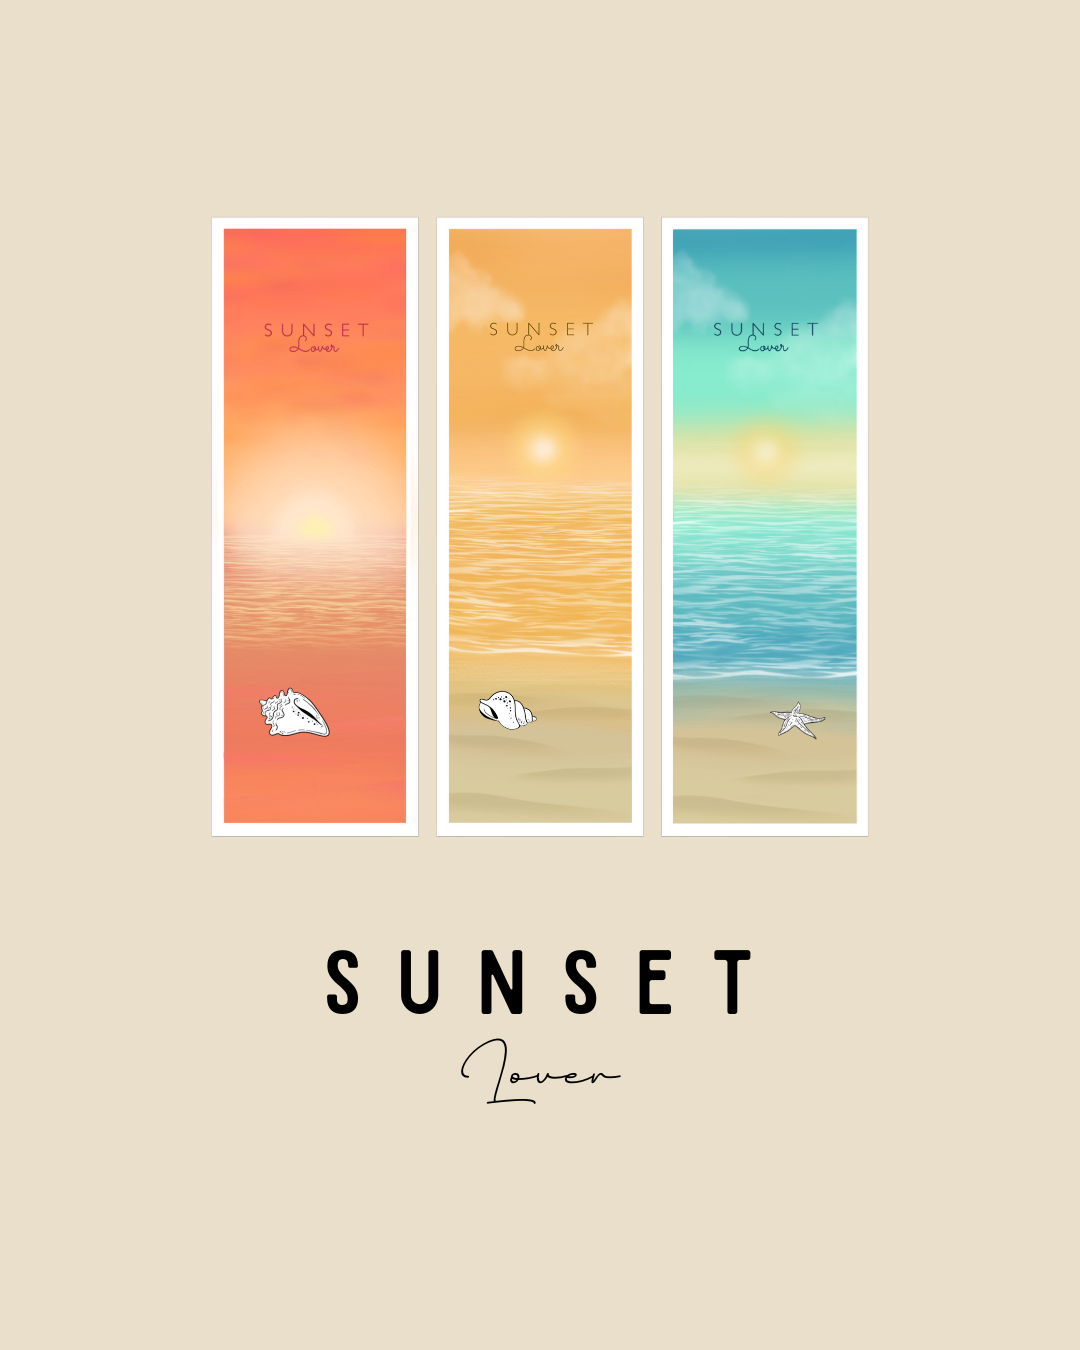 Marque-pages "SUNSET Lover"